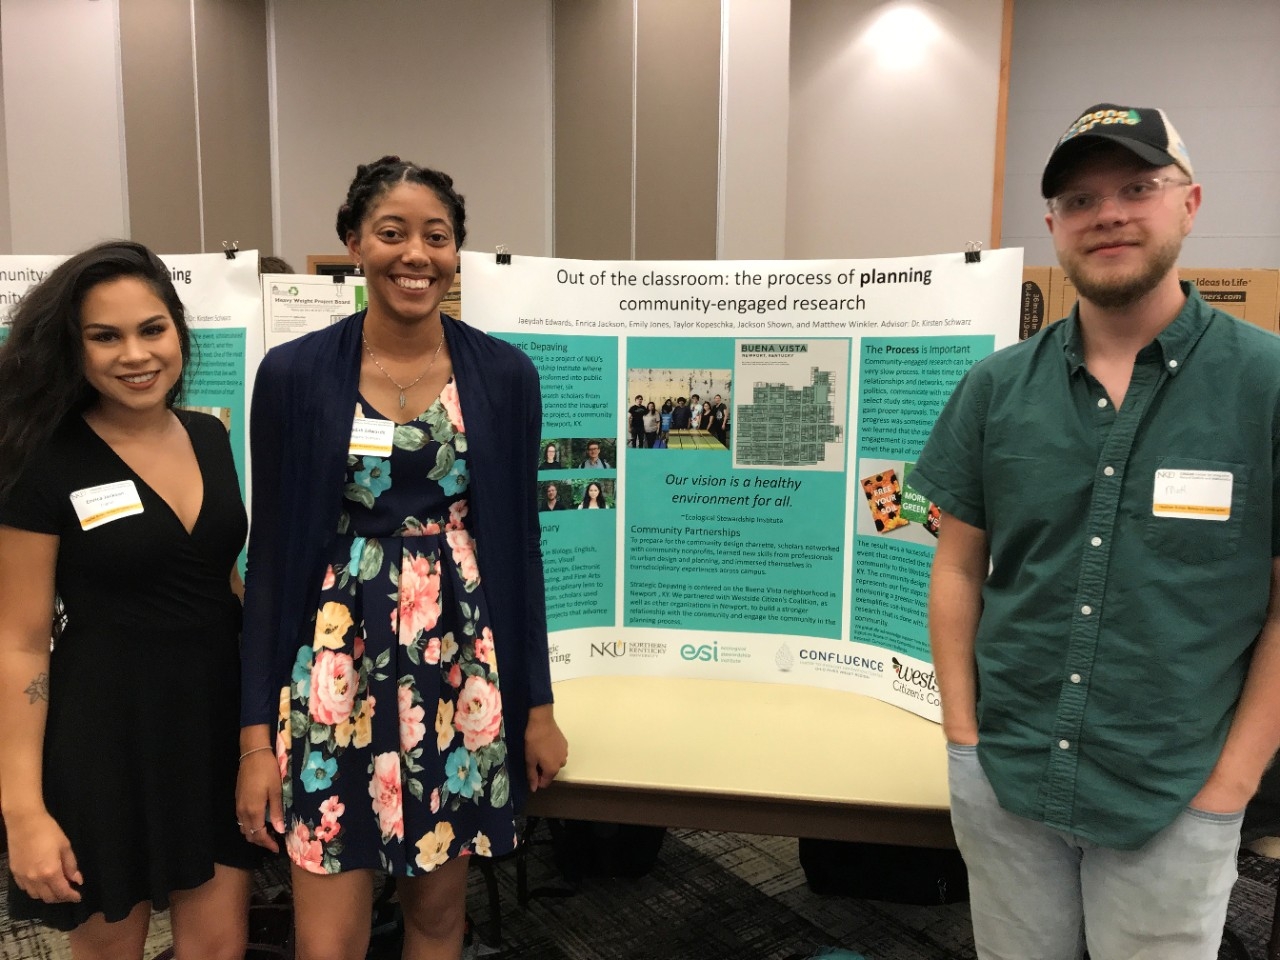 Three Northern Kentucky University STEM majors smile proudly next to their research poster at a student research celebration event